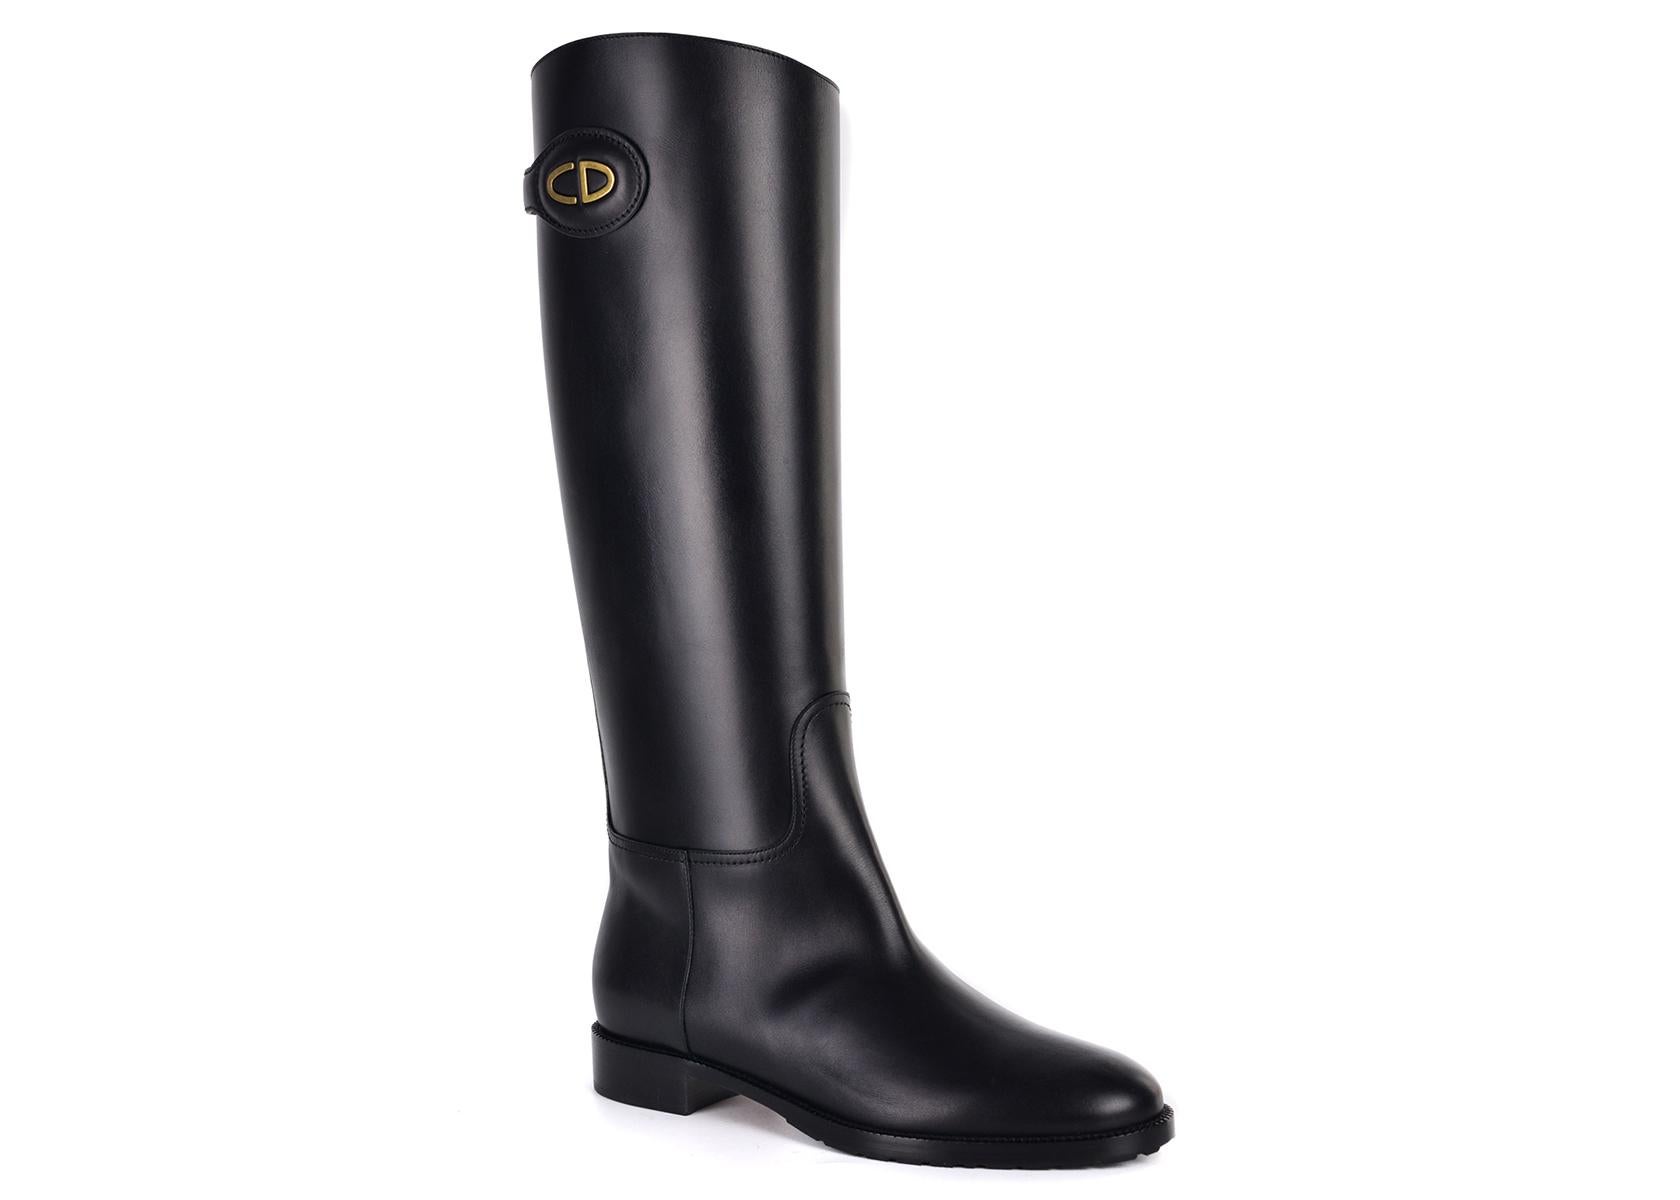 Christian Dior's Diorable knee high boots. These boots feature an all over classic black with a gold tone logo for an eccentric ankle boot. Perfect stand out shoes for that accented accessorie in your everyday wardrobe. 

Christian Dior's Diorable